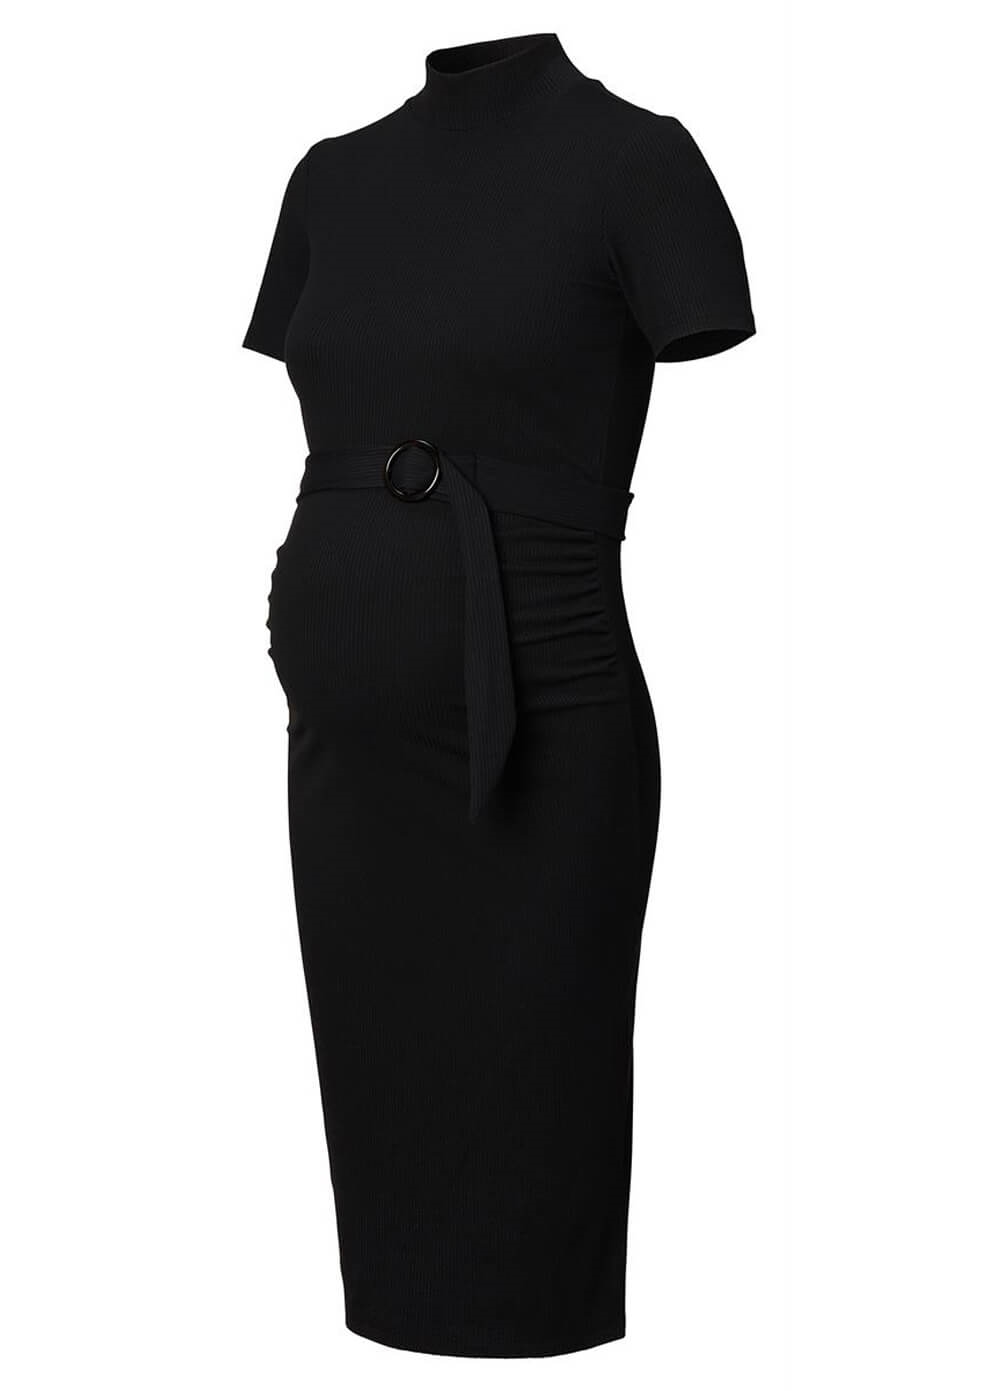 Supermom - Belted Ribbed Black Maternity Dress | Queen Bee